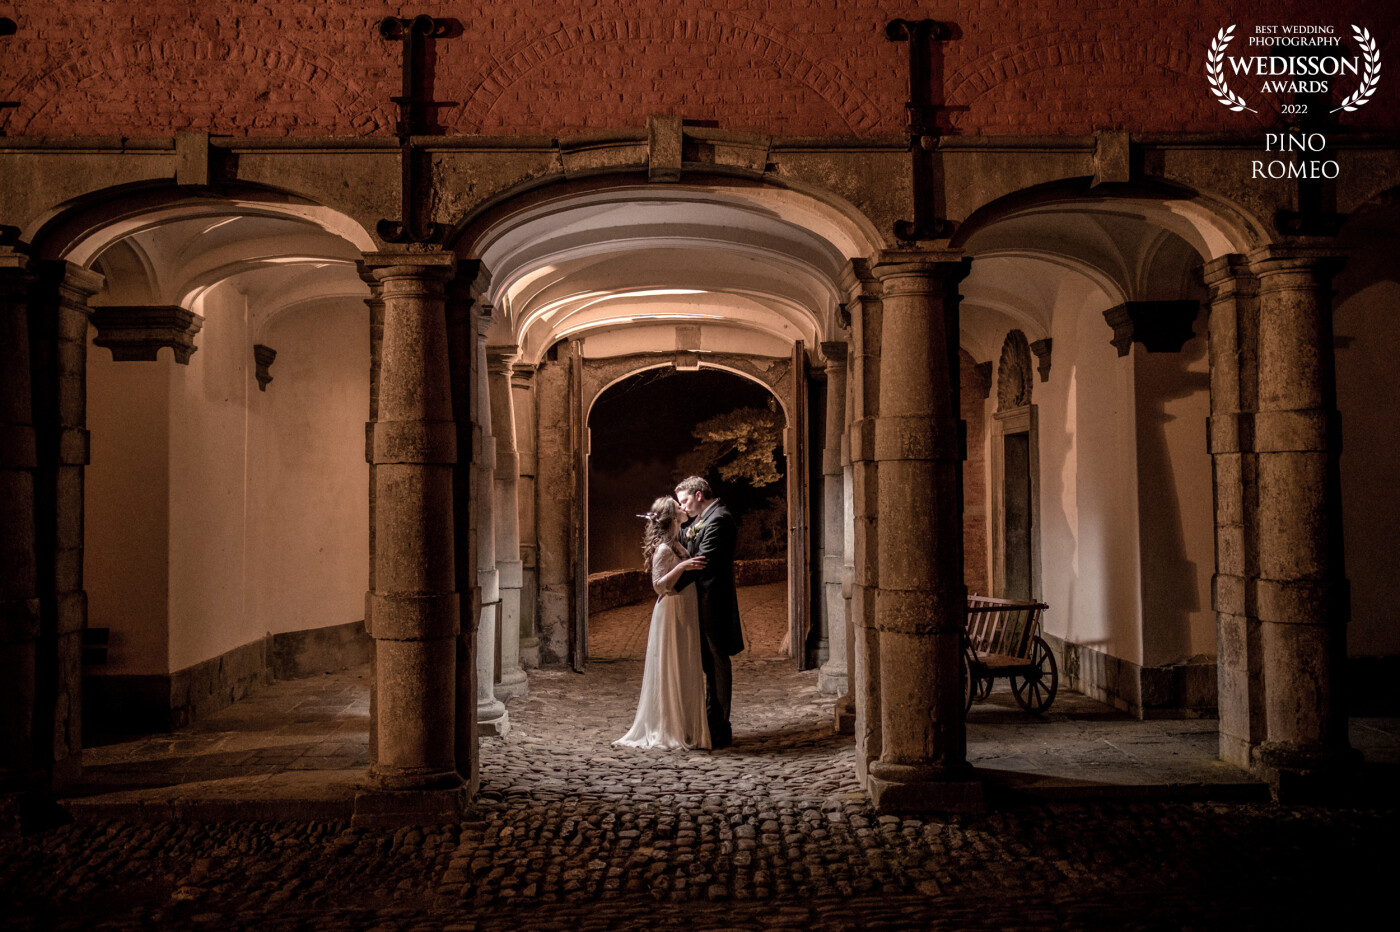 During the dance, Delphine and Jean-François spend some time alone and enjoy the calm of the Château de Lavaux-Sainte-Anne.  This place is one of the most beautiful wedding venues in Belgium.